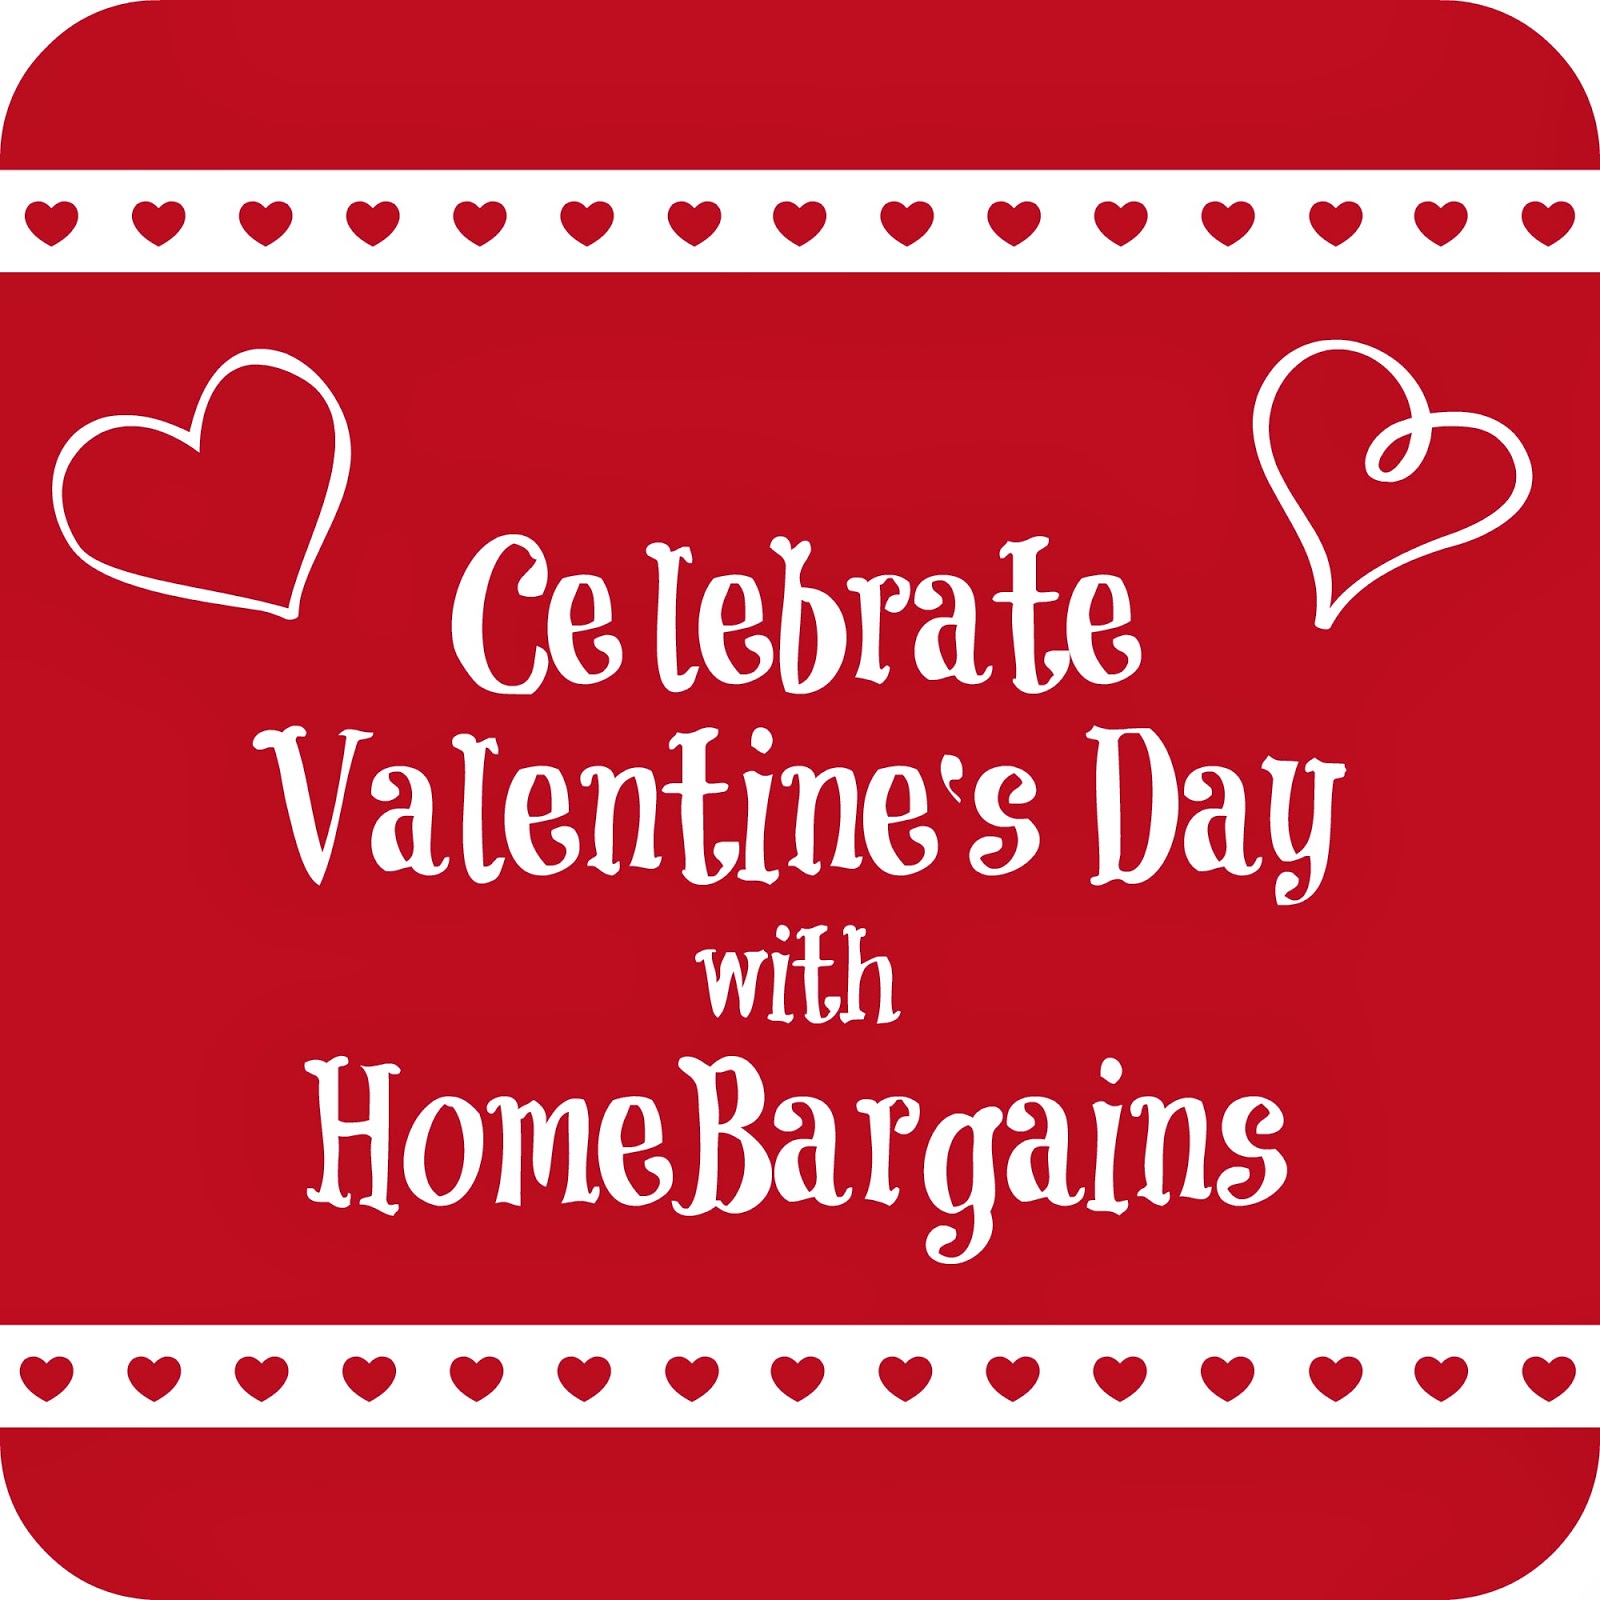 Celebrate Valentine's Day with Home Bargains